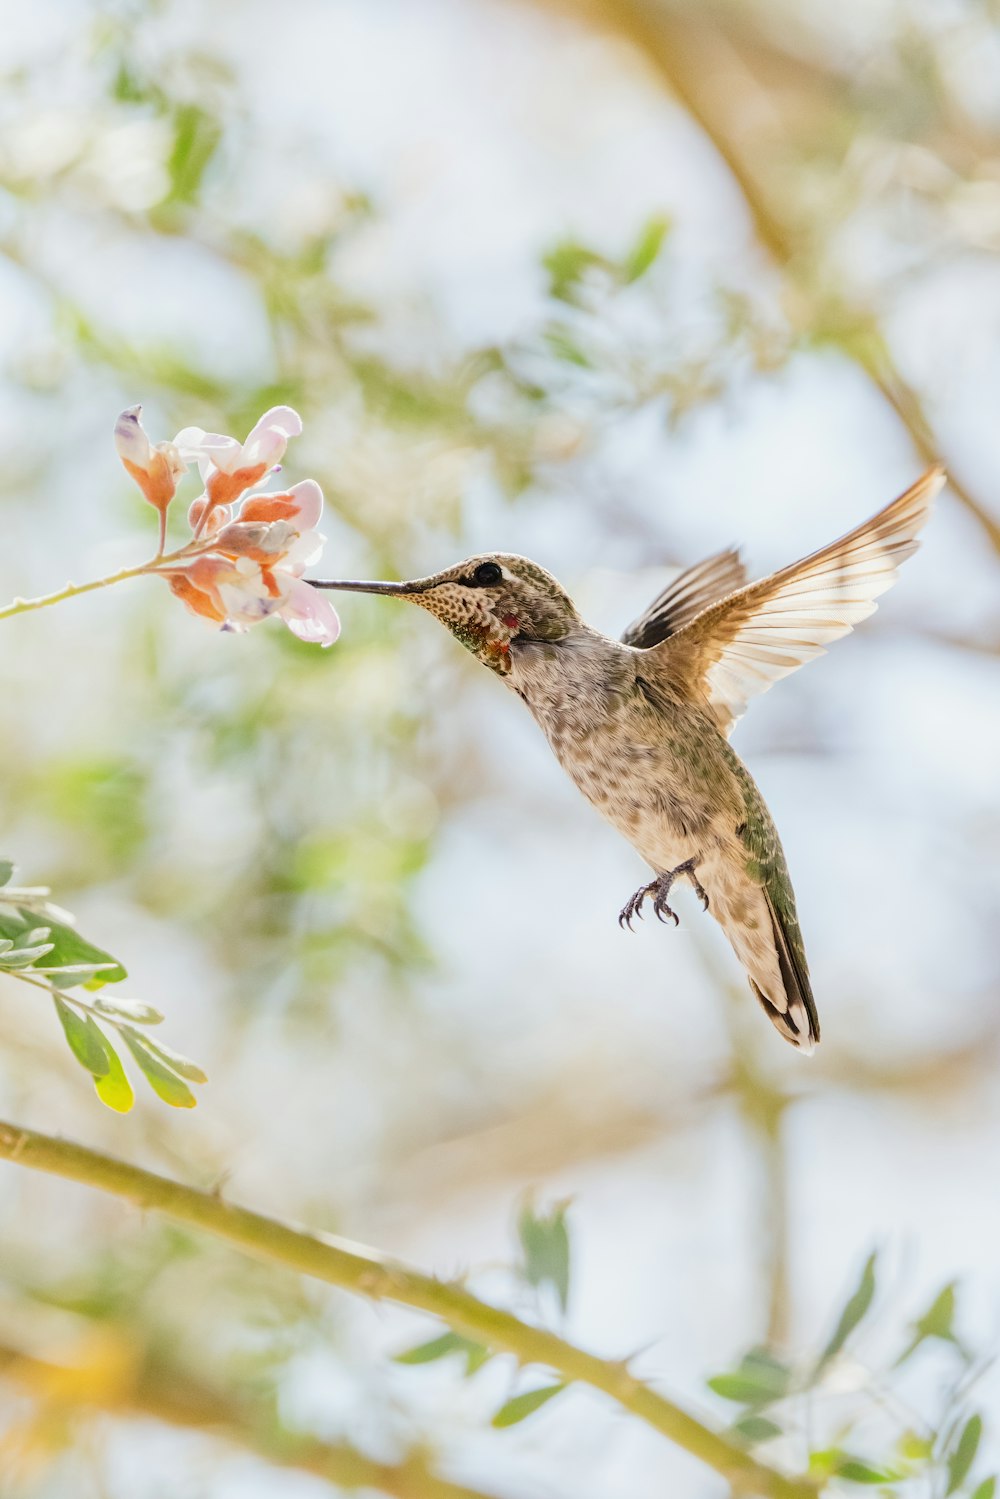 brown humming bird flying in the air